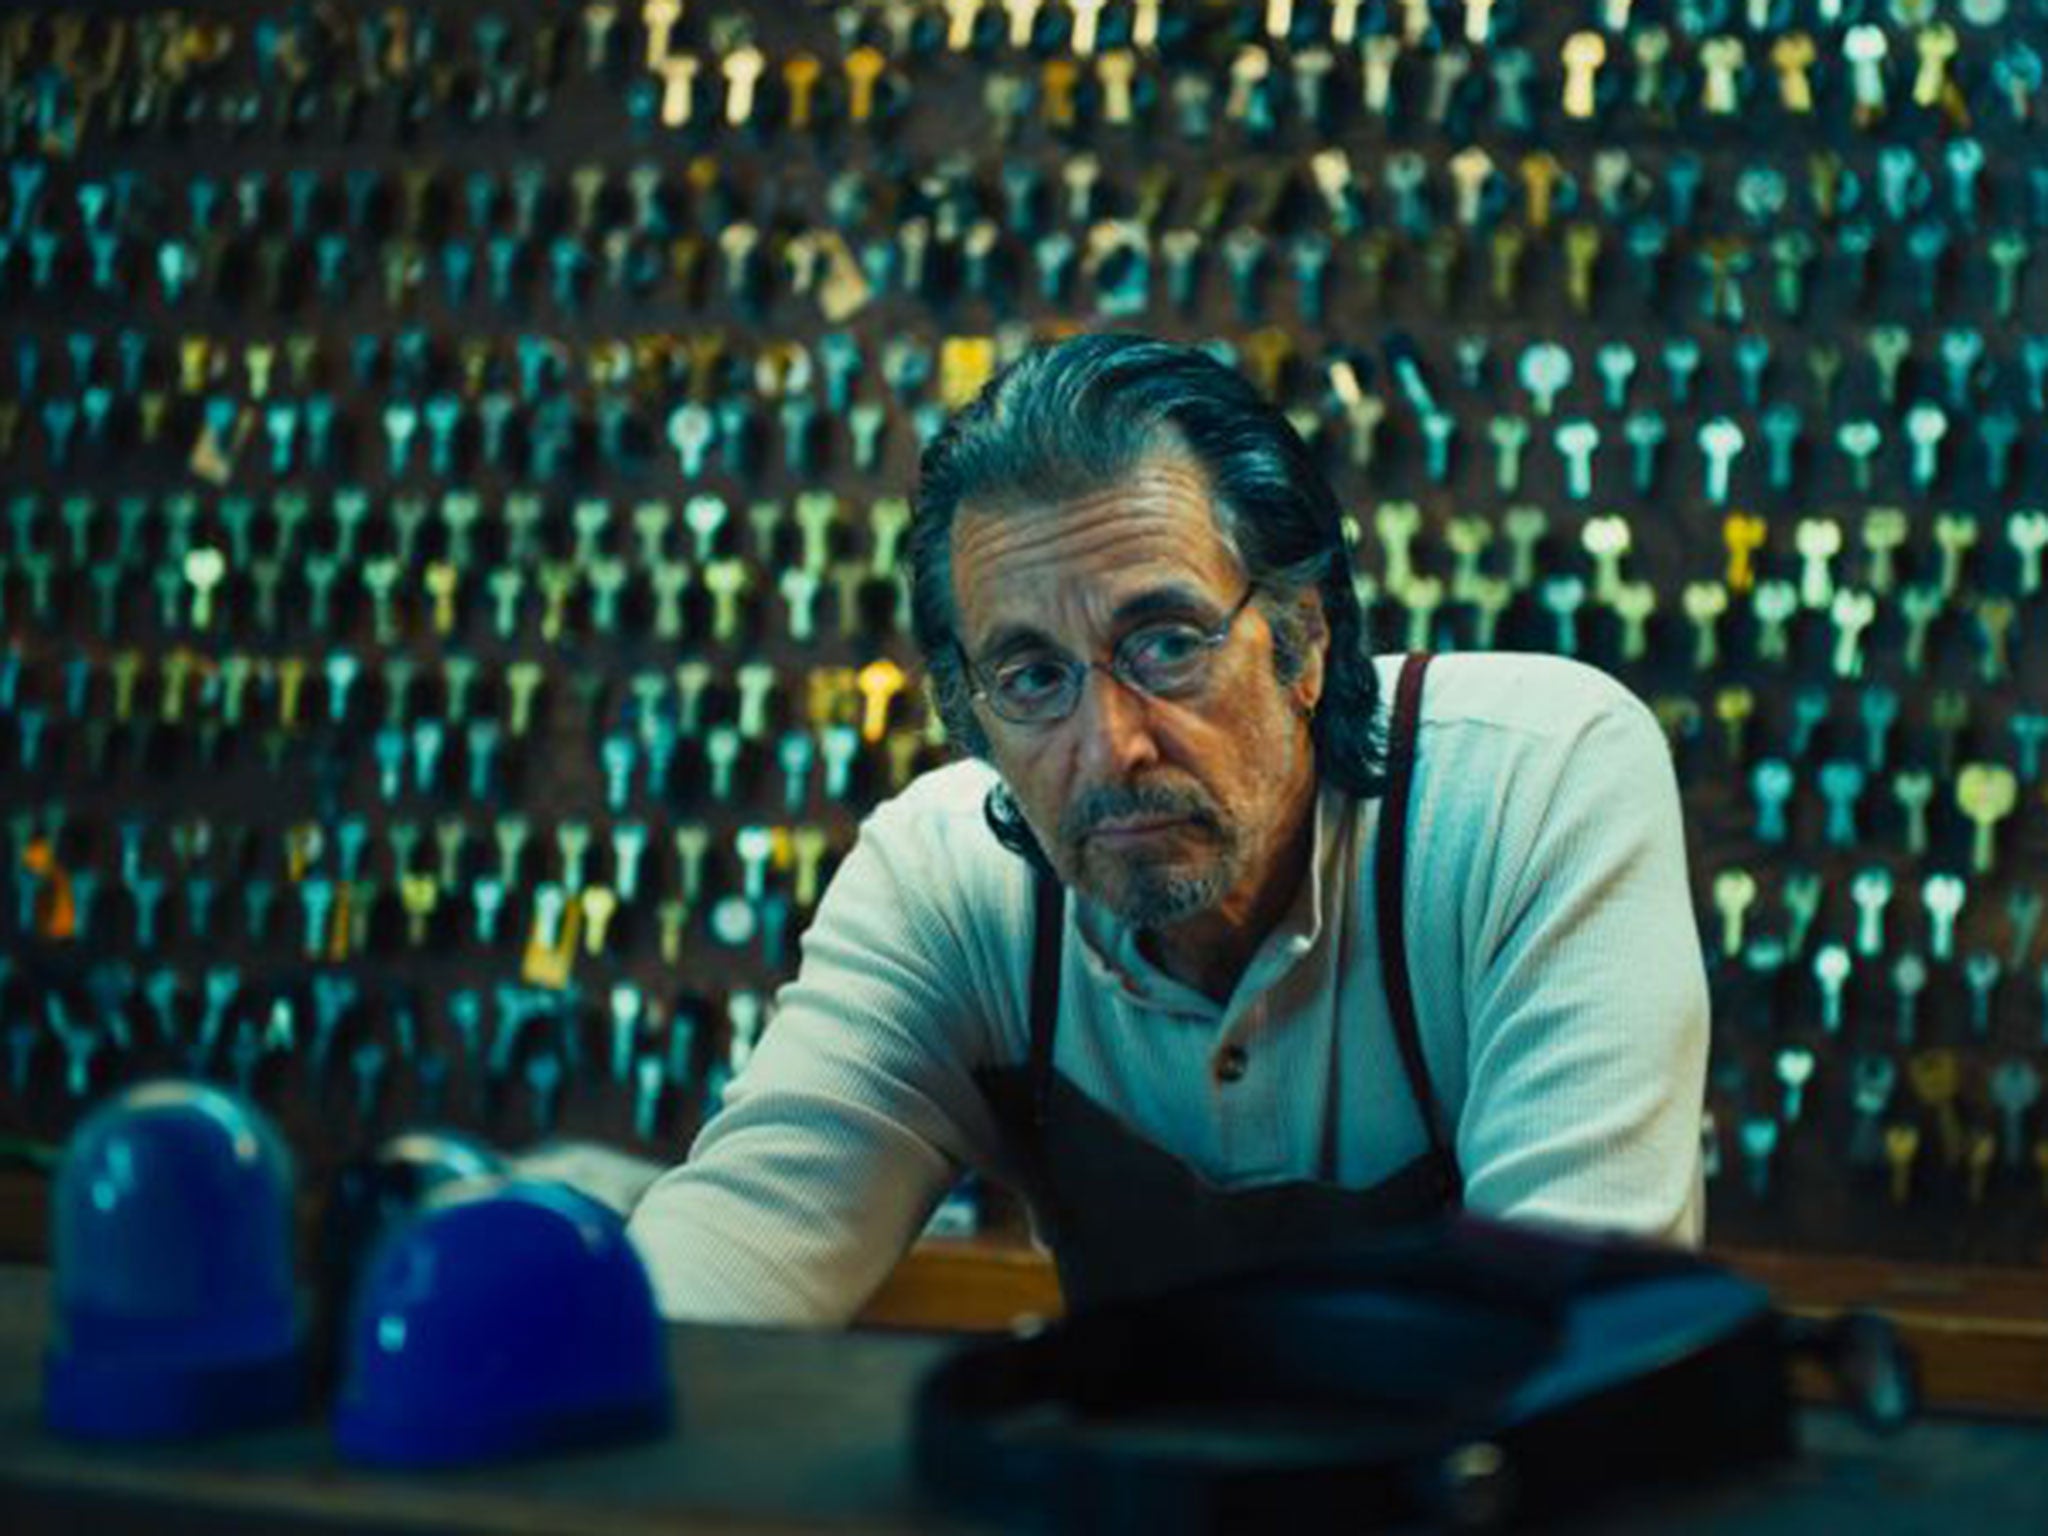 In ‘Manglehorn’, Pacino plays a lonely locksmith